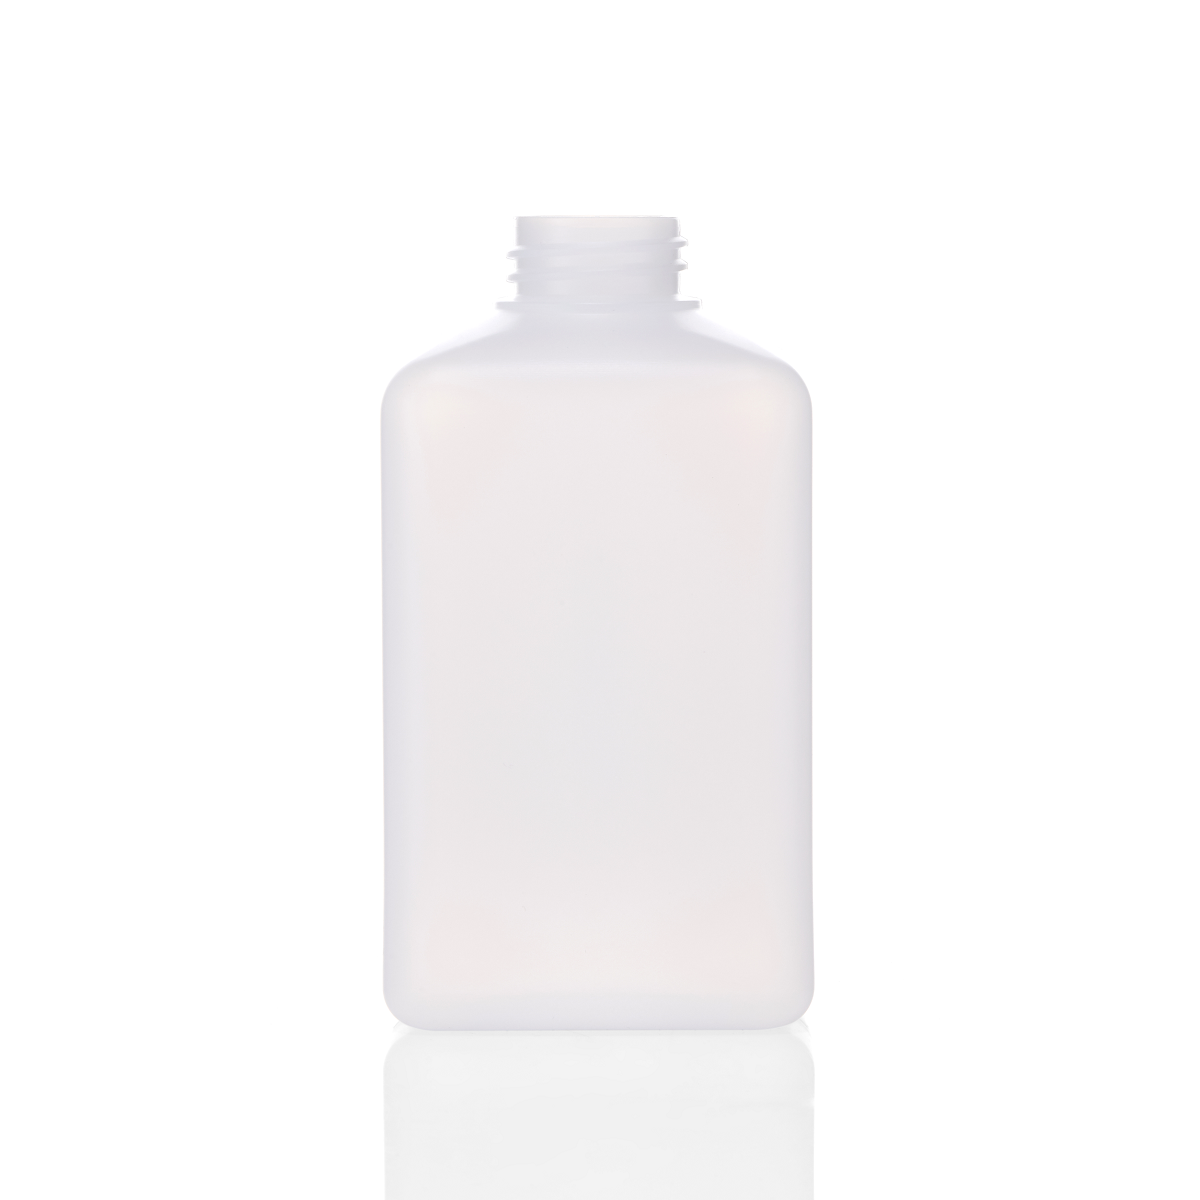 Alcohol Disinfection Bottle